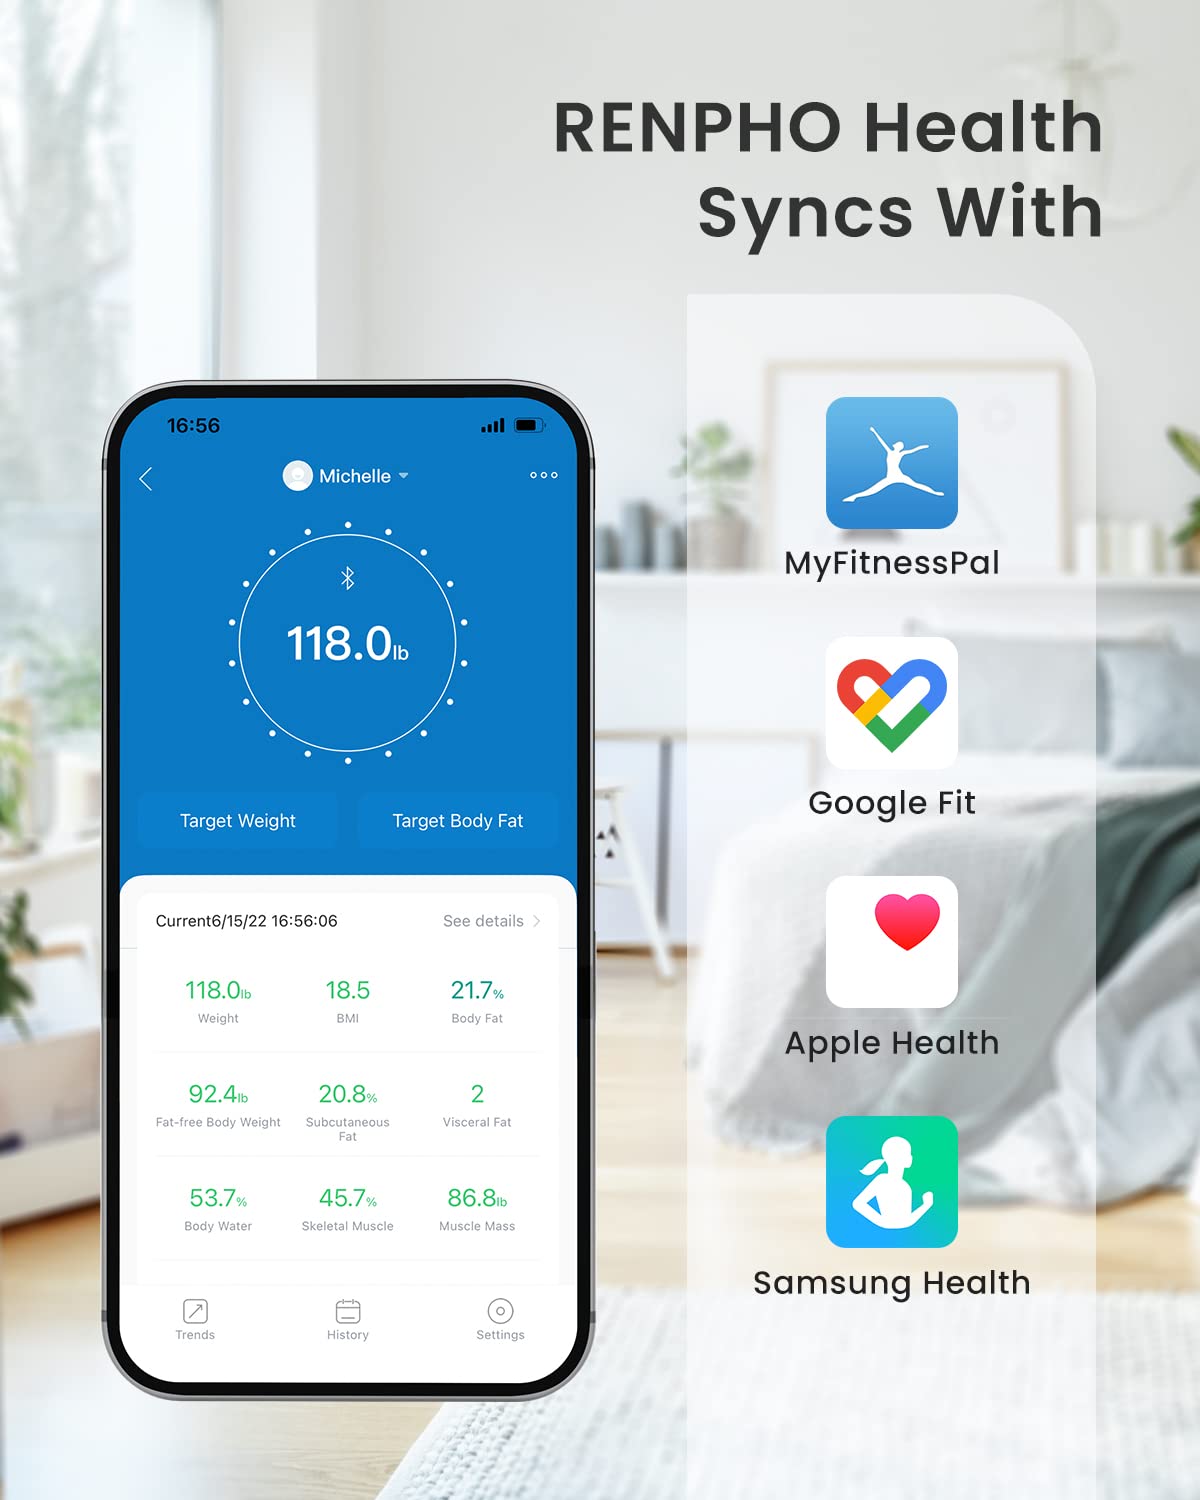 An advertisement for Renpho EU's Smart Body Scale - Lite displaying its compatibility with MyFitnessPal, Apple Health, and Samsung Health. It features a smartphone showing detailed body composition data and health indices on the app.